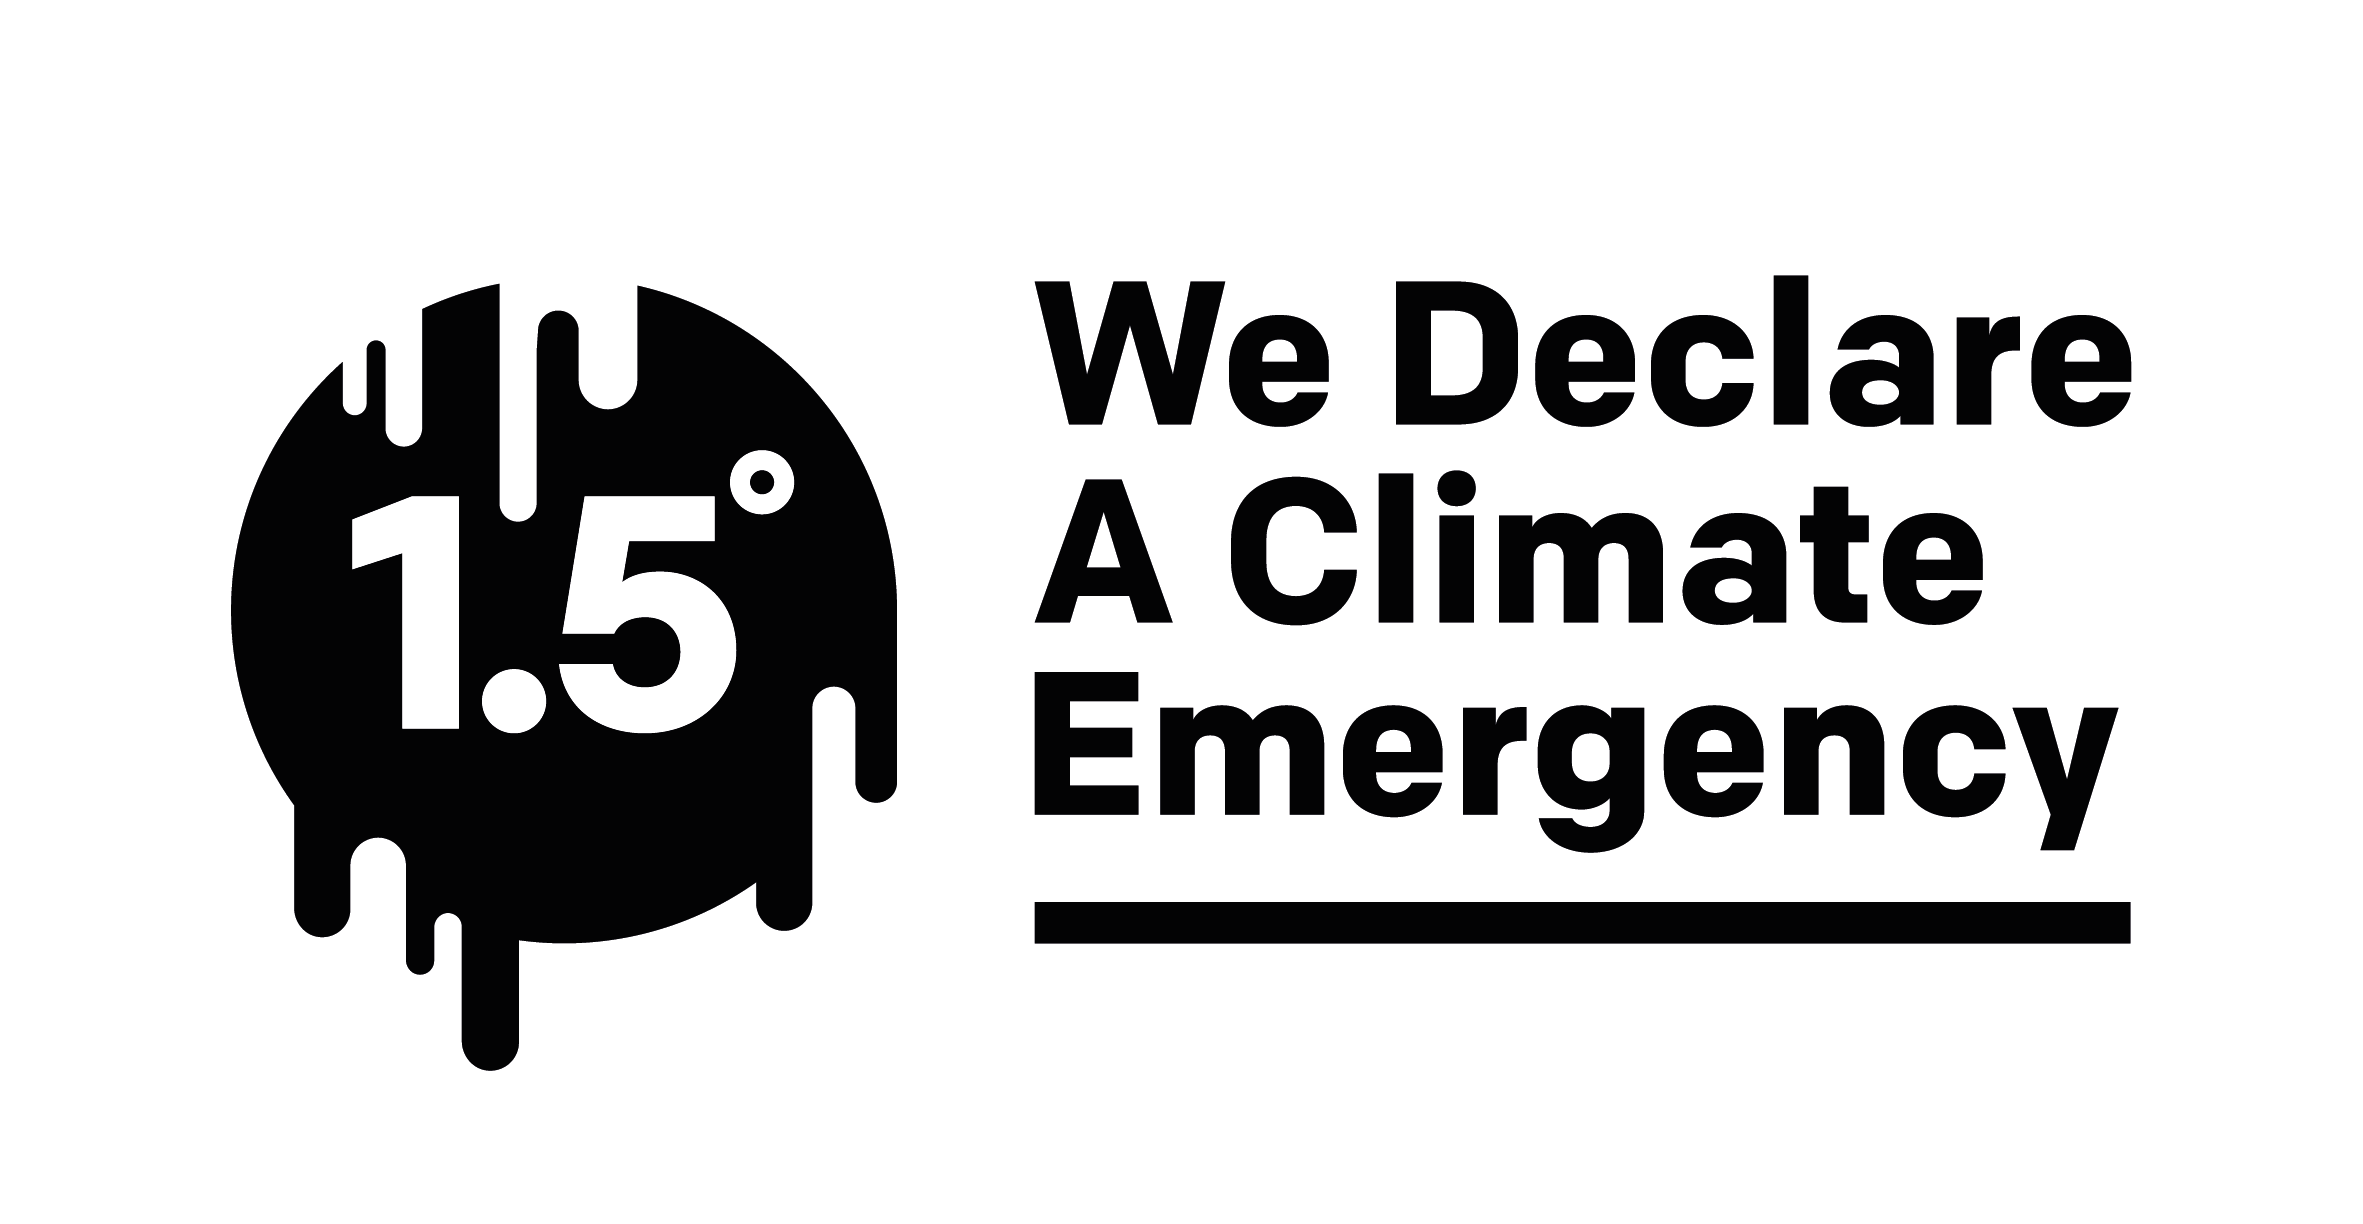 We declare a climate emergency